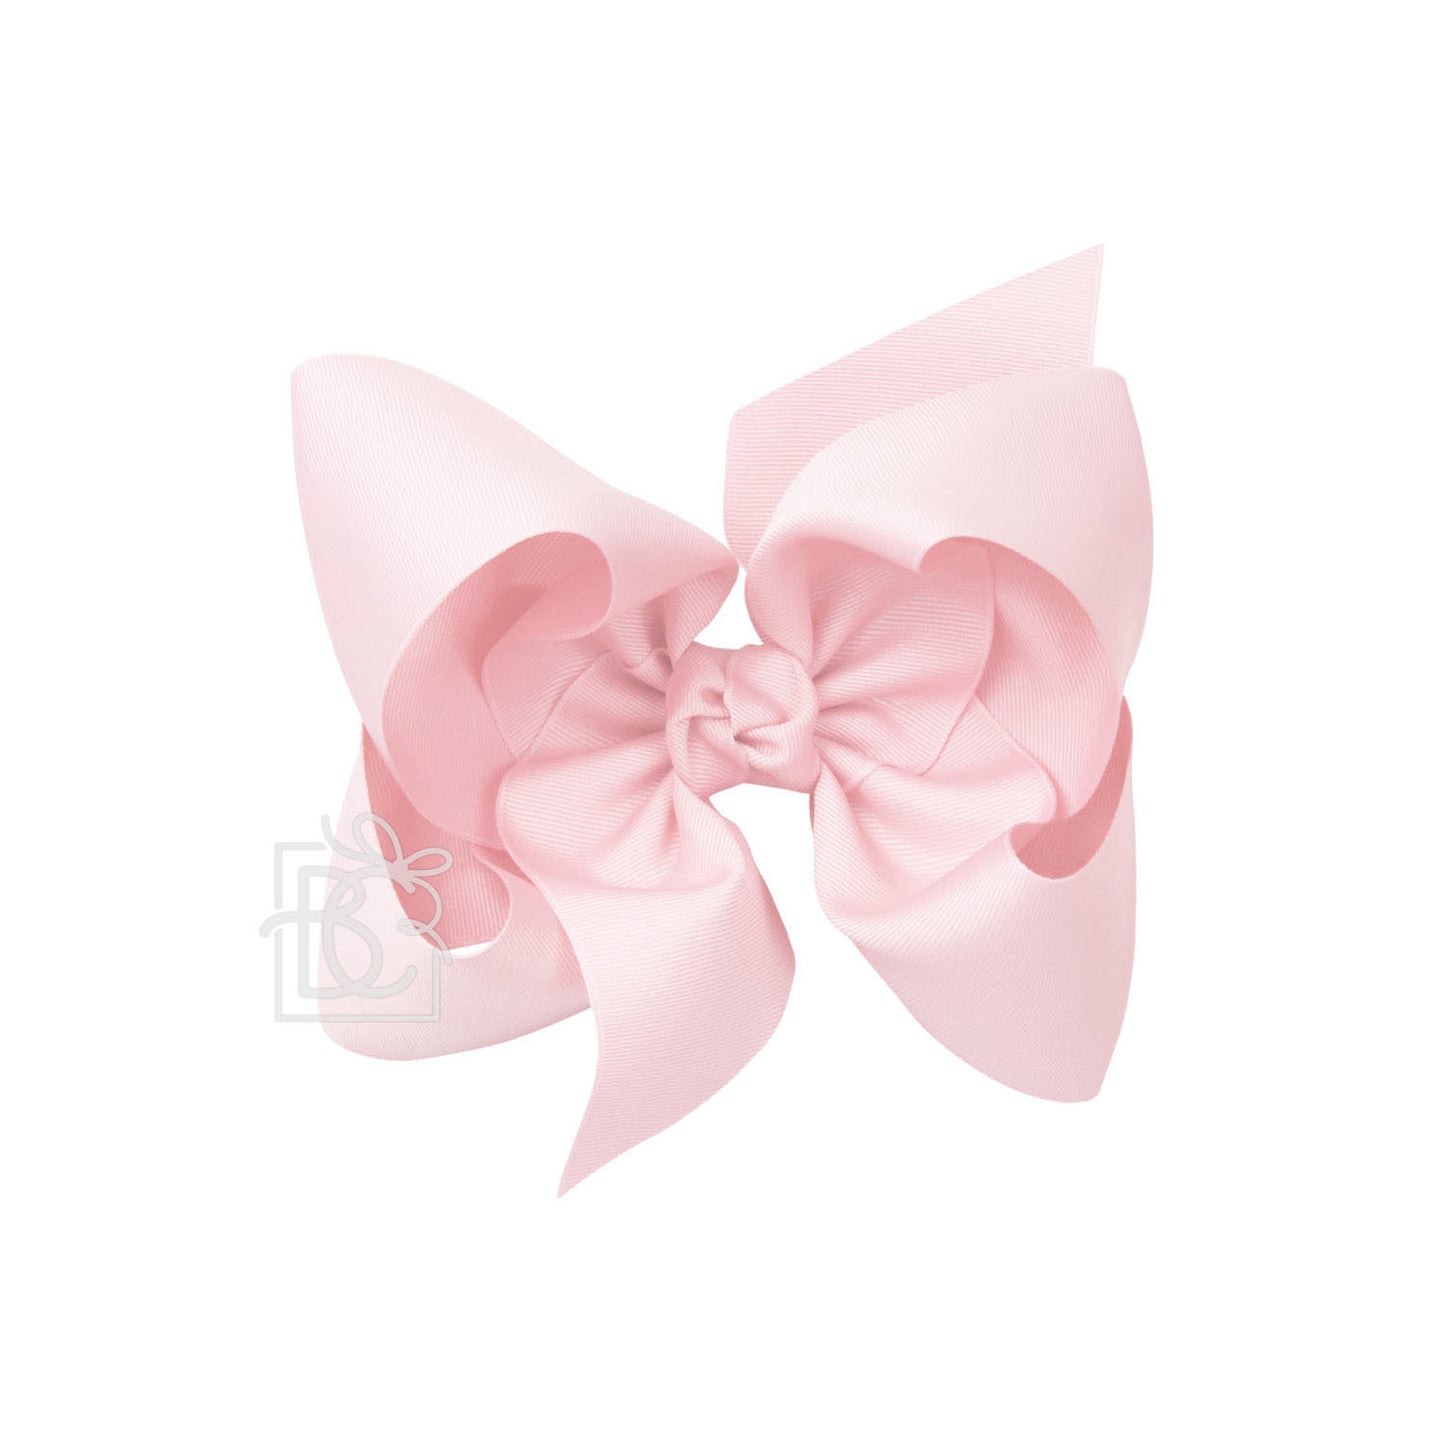 Texas Sized Bow in Light Pink  - Doodlebug's Children's Boutique